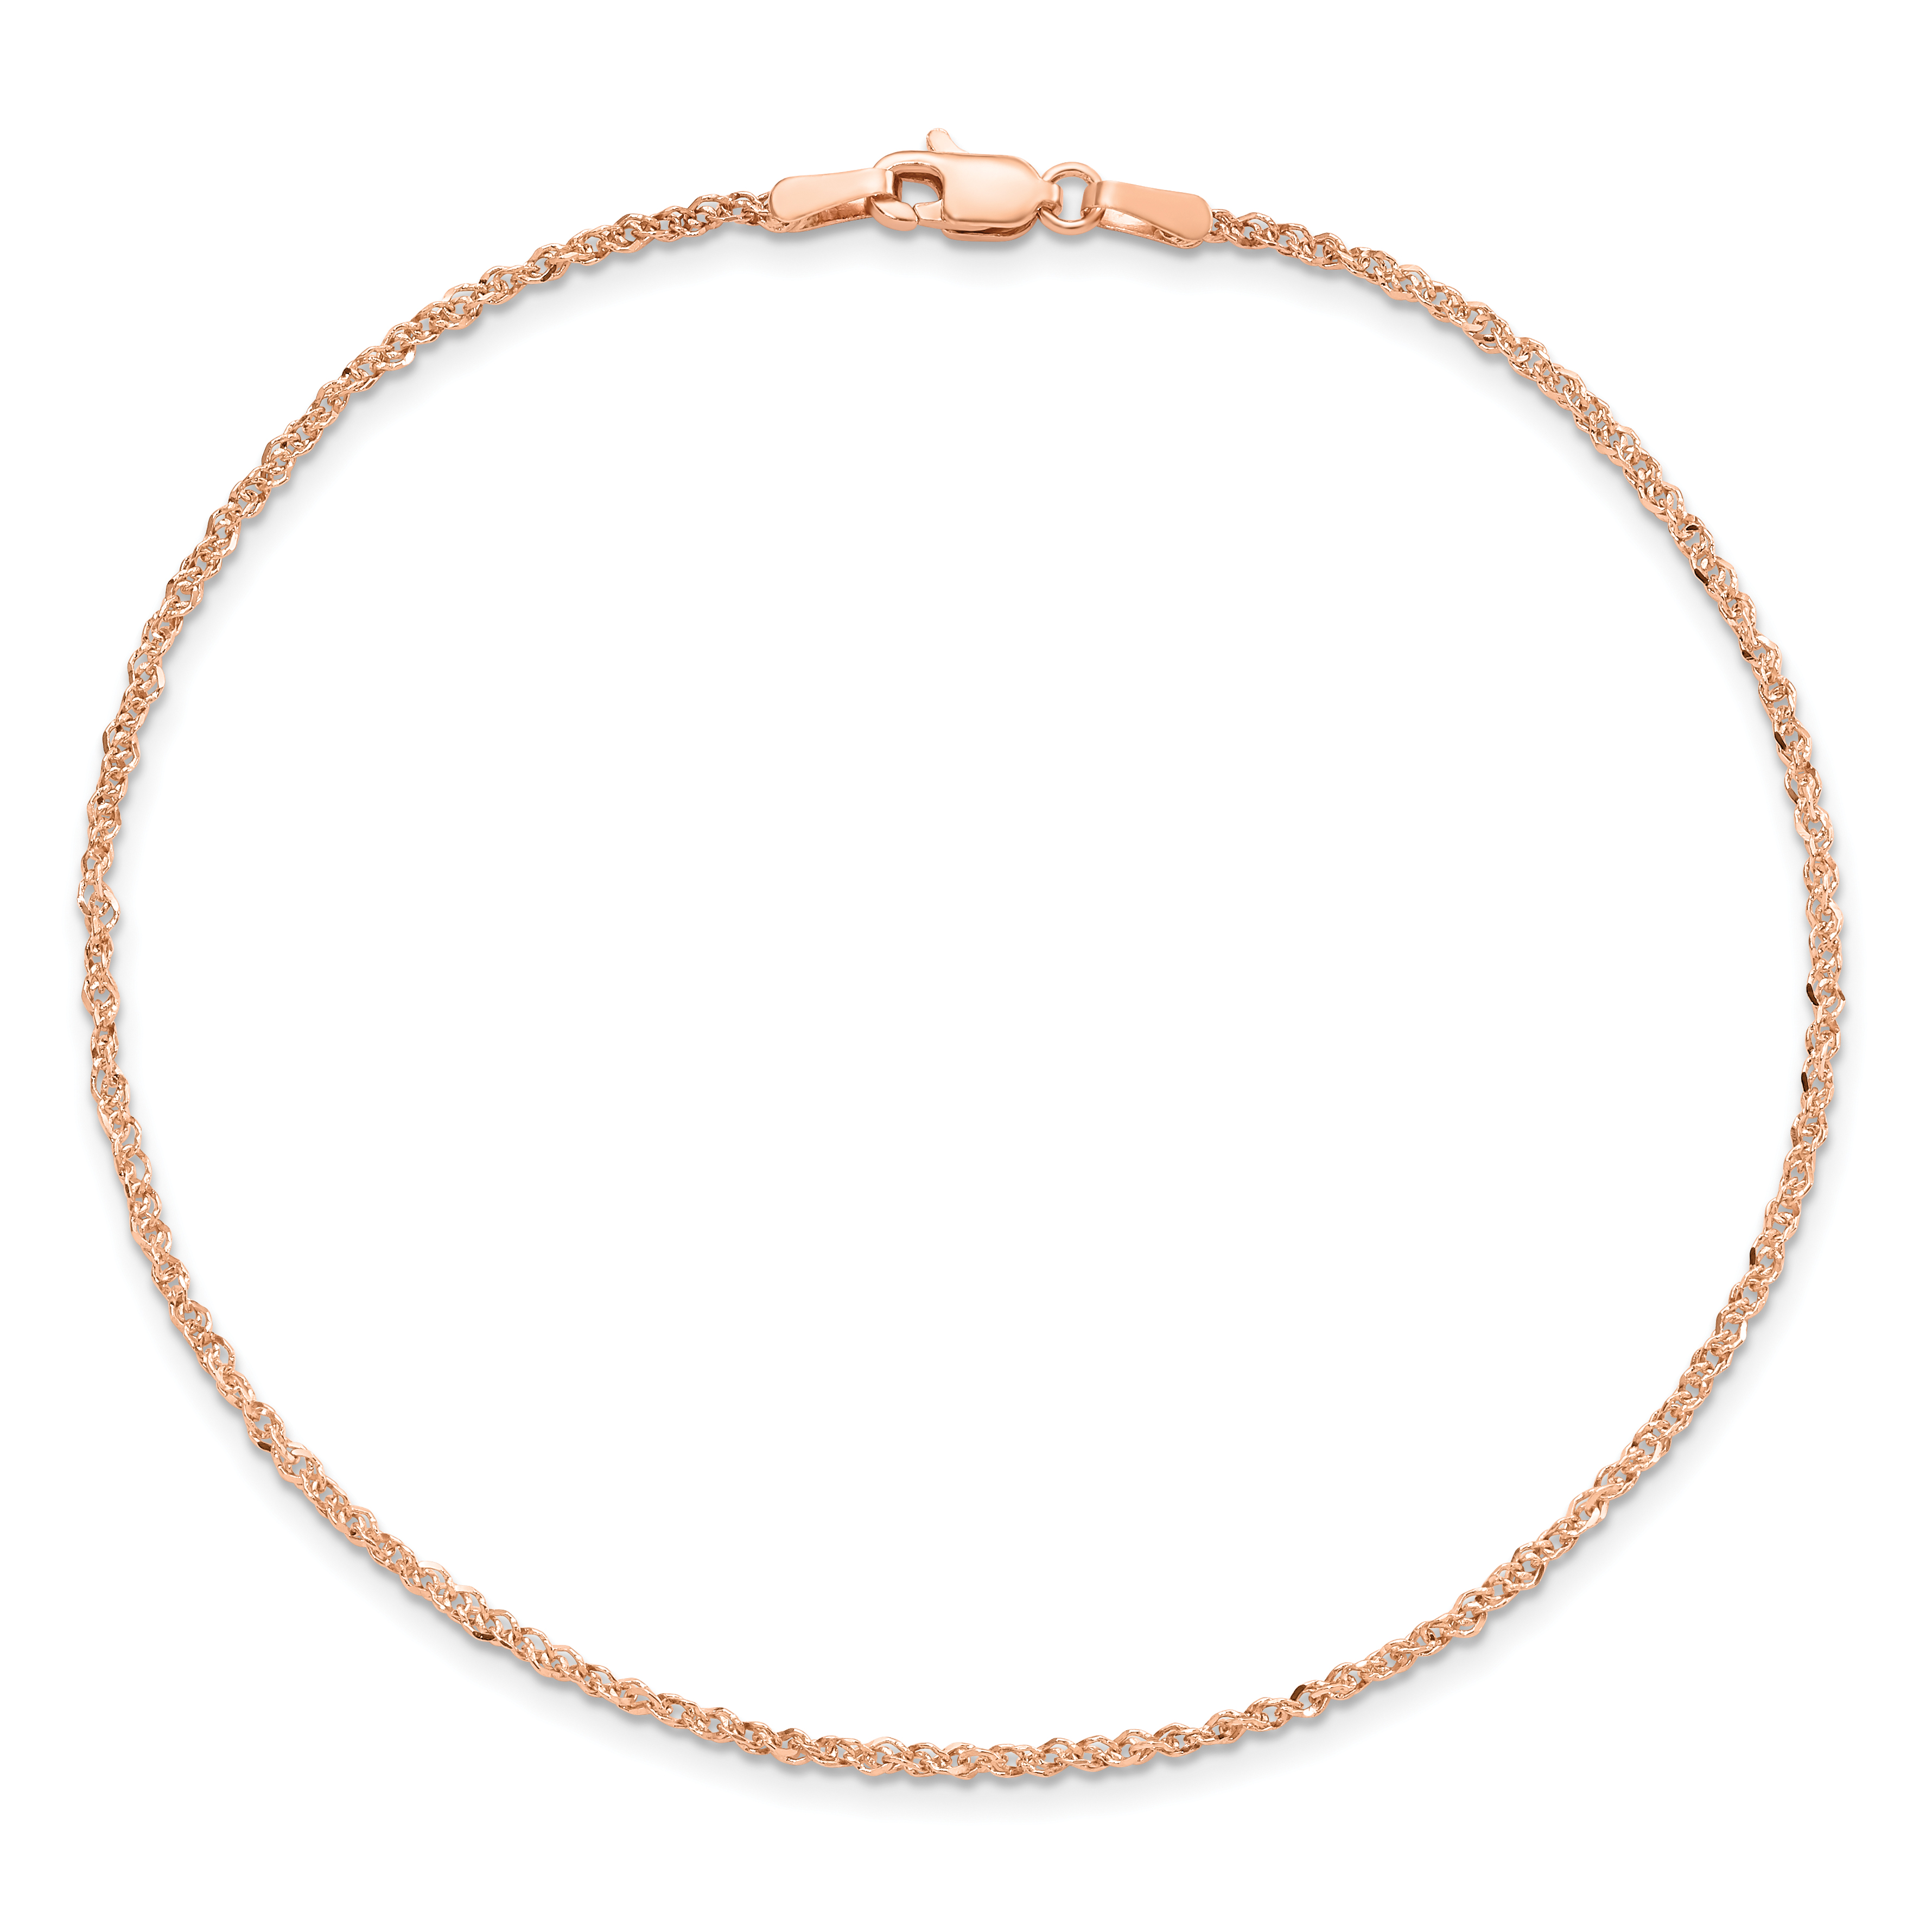 Beautiful Yellow gold 14K 14K 1.7mm Ropa Anklet